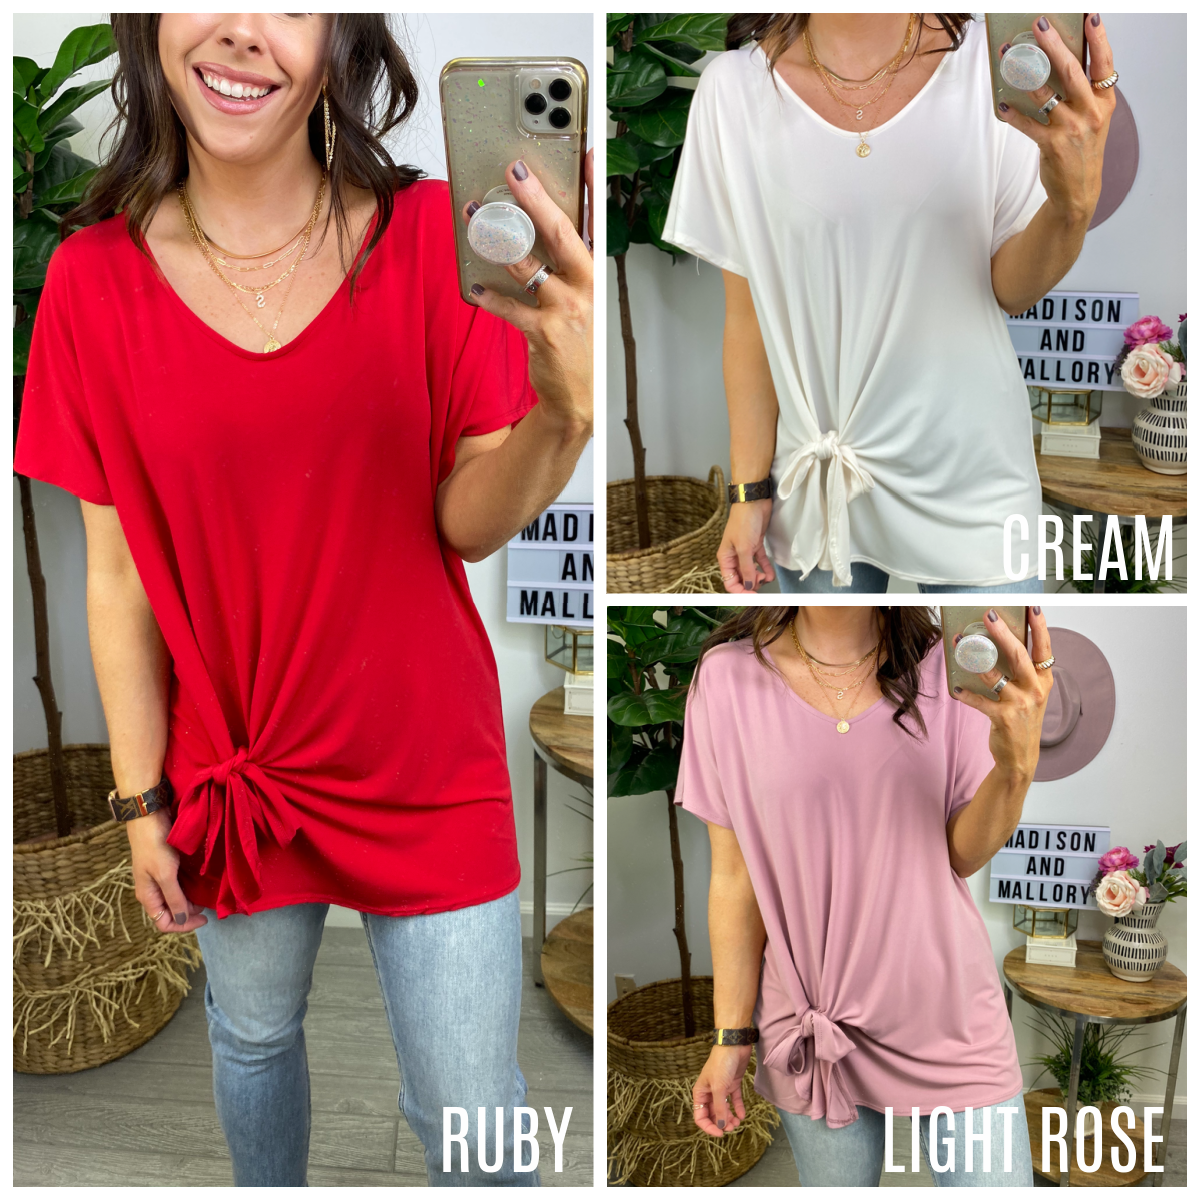  Picture Us Short Sleeve Tie Front Top - Madison and Mallory